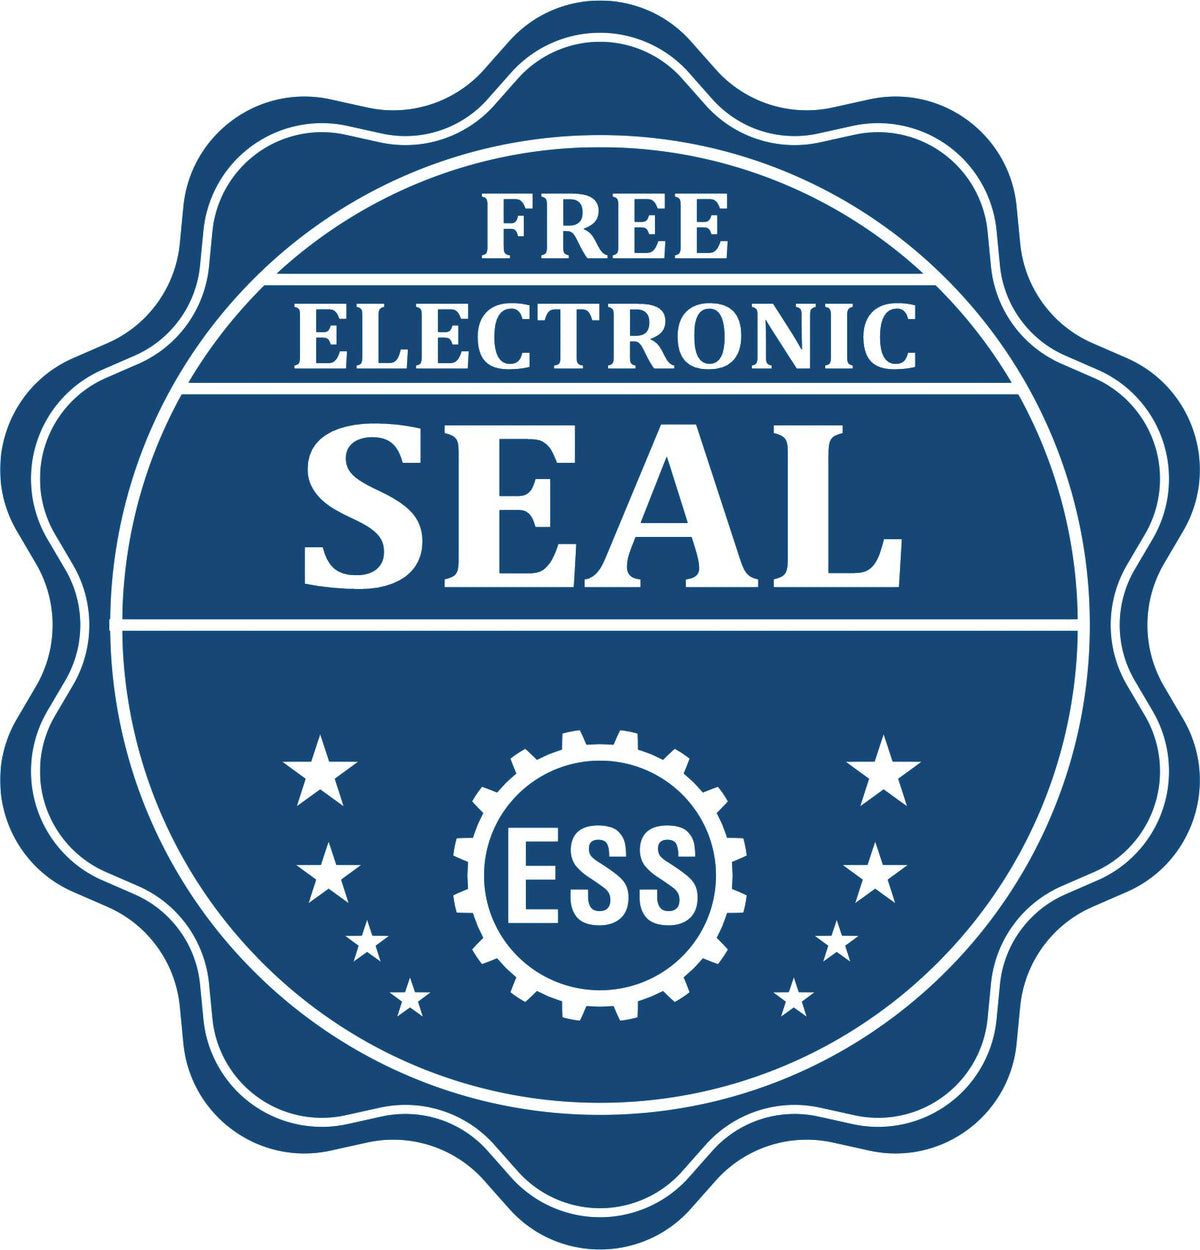 A badge showing a free electronic seal for the Heavy Duty Cast Iron Minnesota Engineer Seal Embosser with stars and the ESS gear on the emblem.